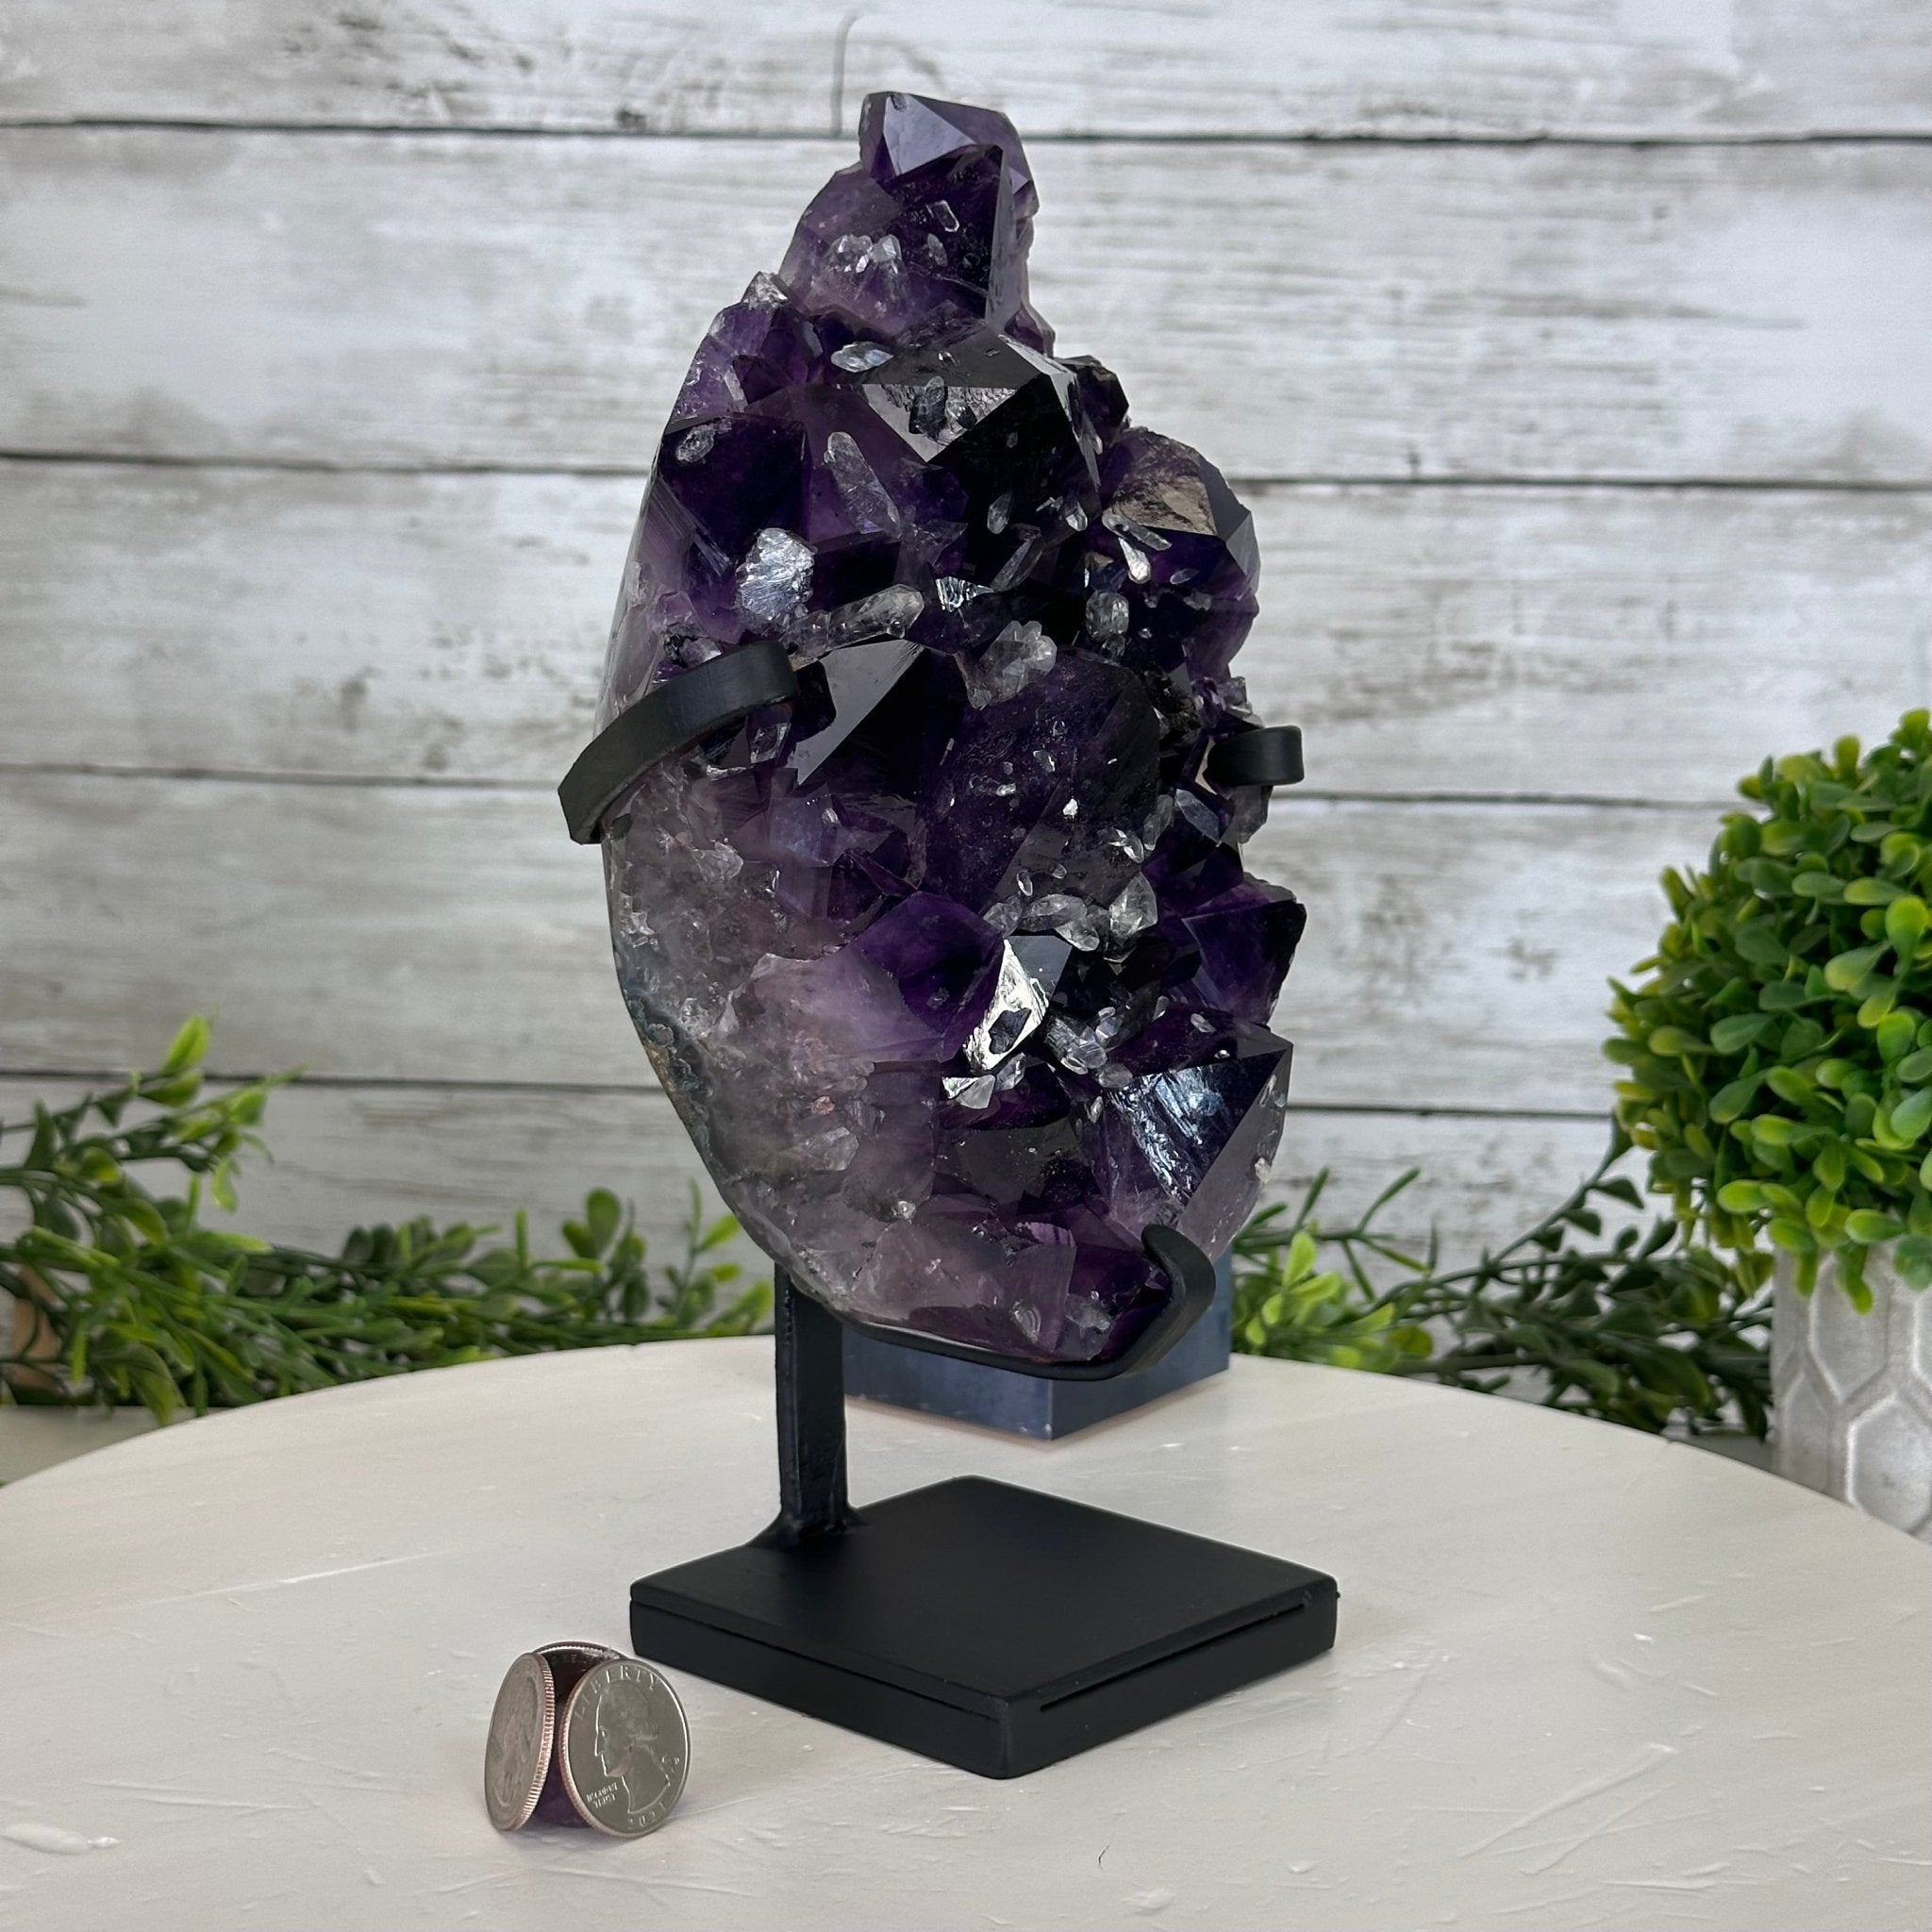 Super Quality Amethyst Cluster on a Metal Stand, 5.4 lbs & 9.5" Tall #5491-0153 - Brazil GemsBrazil GemsSuper Quality Amethyst Cluster on a Metal Stand, 5.4 lbs & 9.5" Tall #5491-0153Clusters on Fixed Bases5491-0153